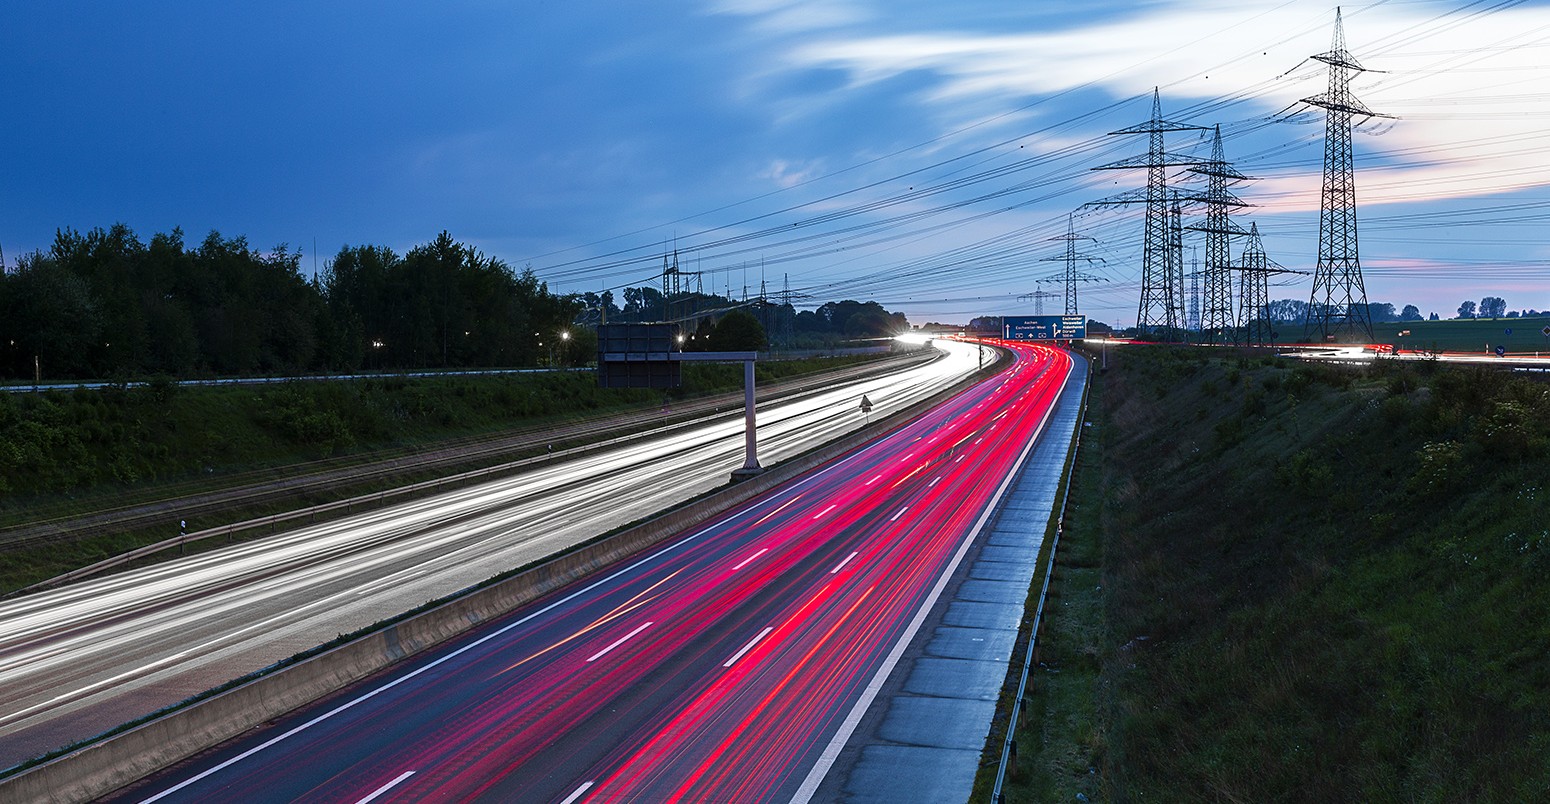 Light trails on a freeway with pylons in the background